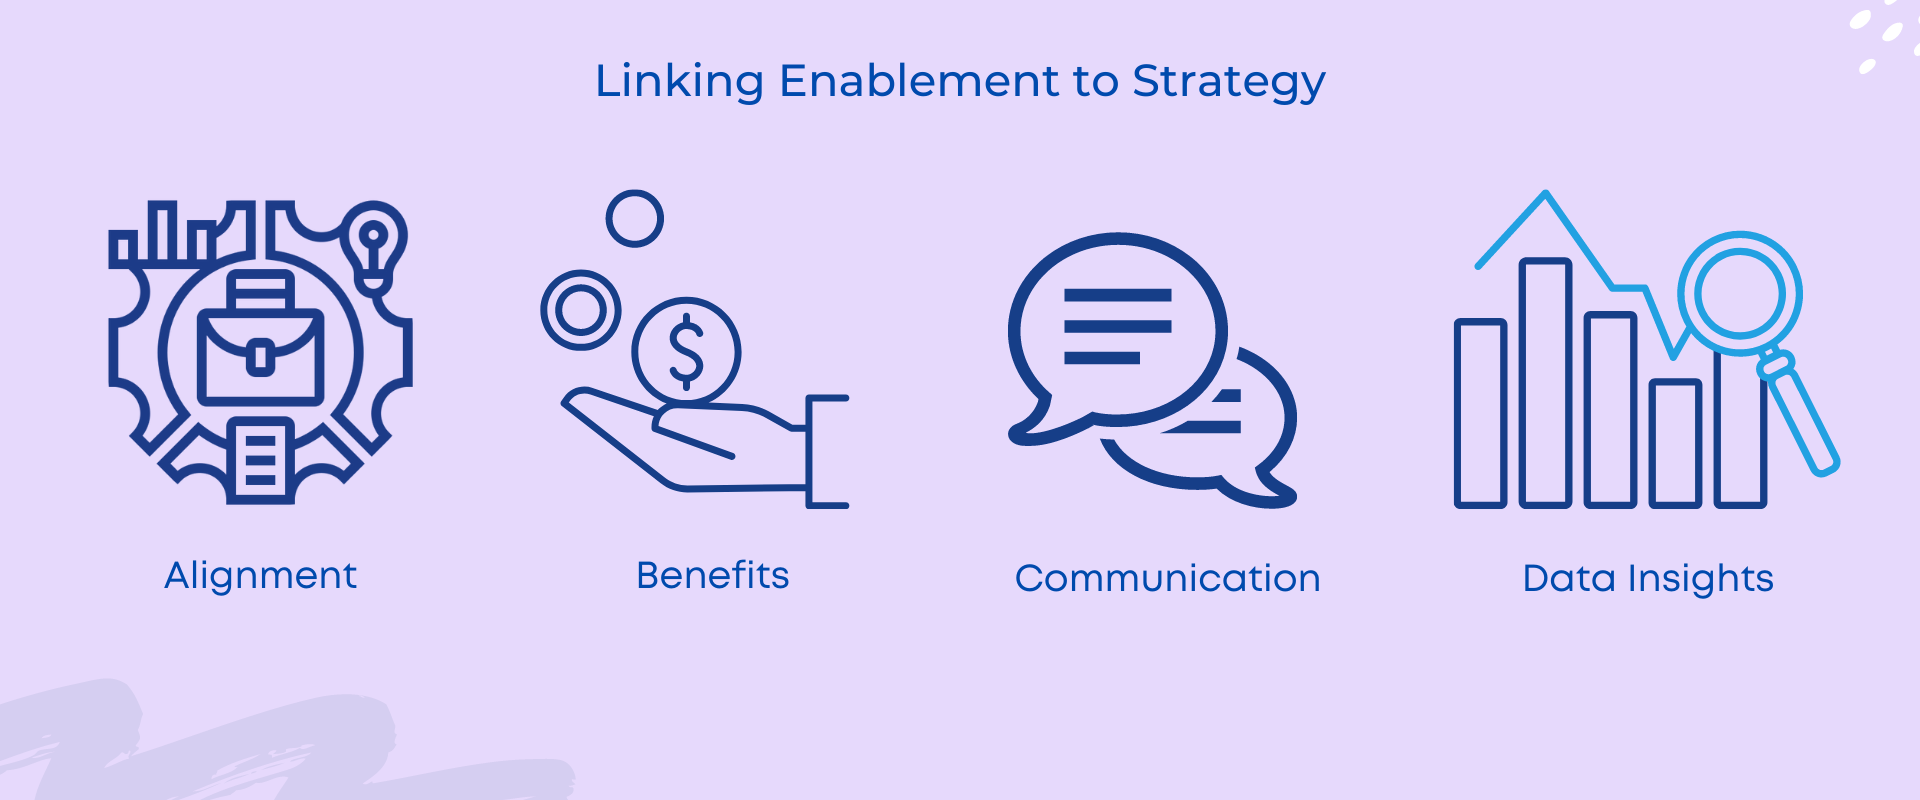 Linking Enablement to Strategy